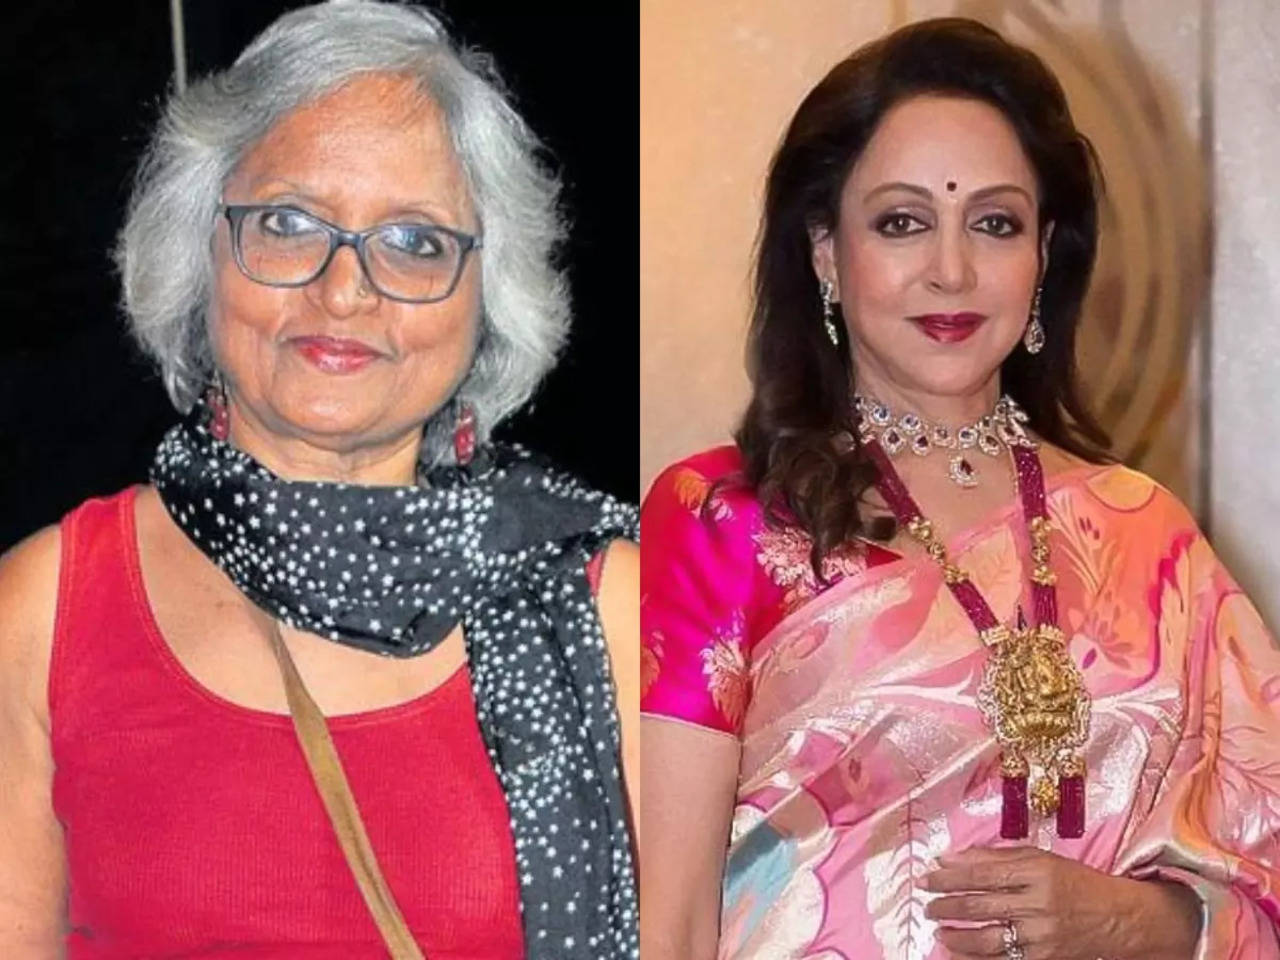 uitlijning Controverse boete Hema Malini didn't shy away from taking up a film on women's sexual needs,  says 'Rihaee' director Aruna Raje Patil | Hindi Movie News - Times of India